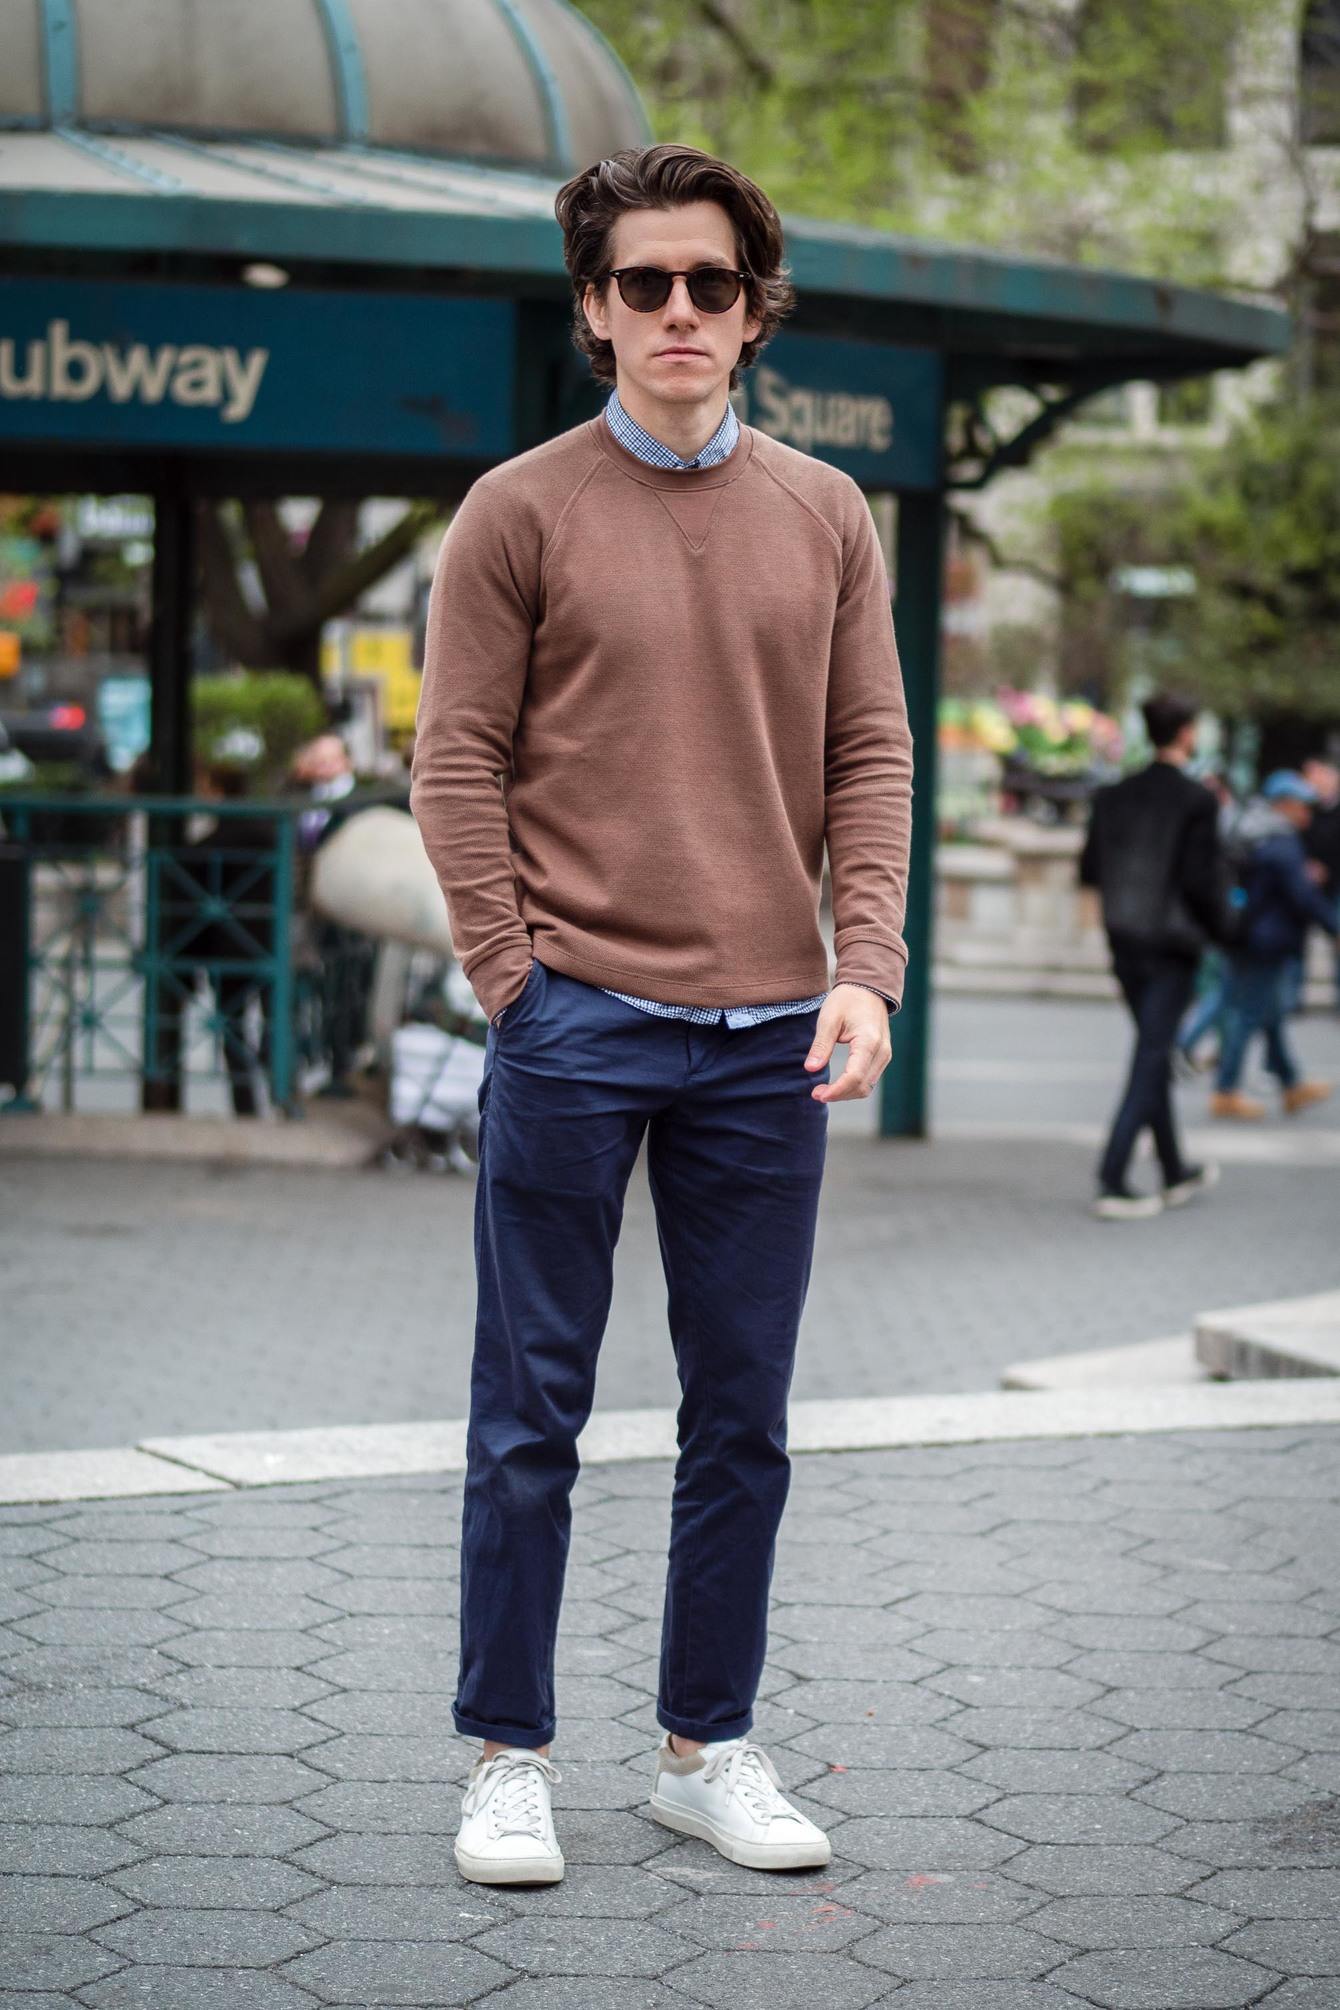 shoes with navy chinos